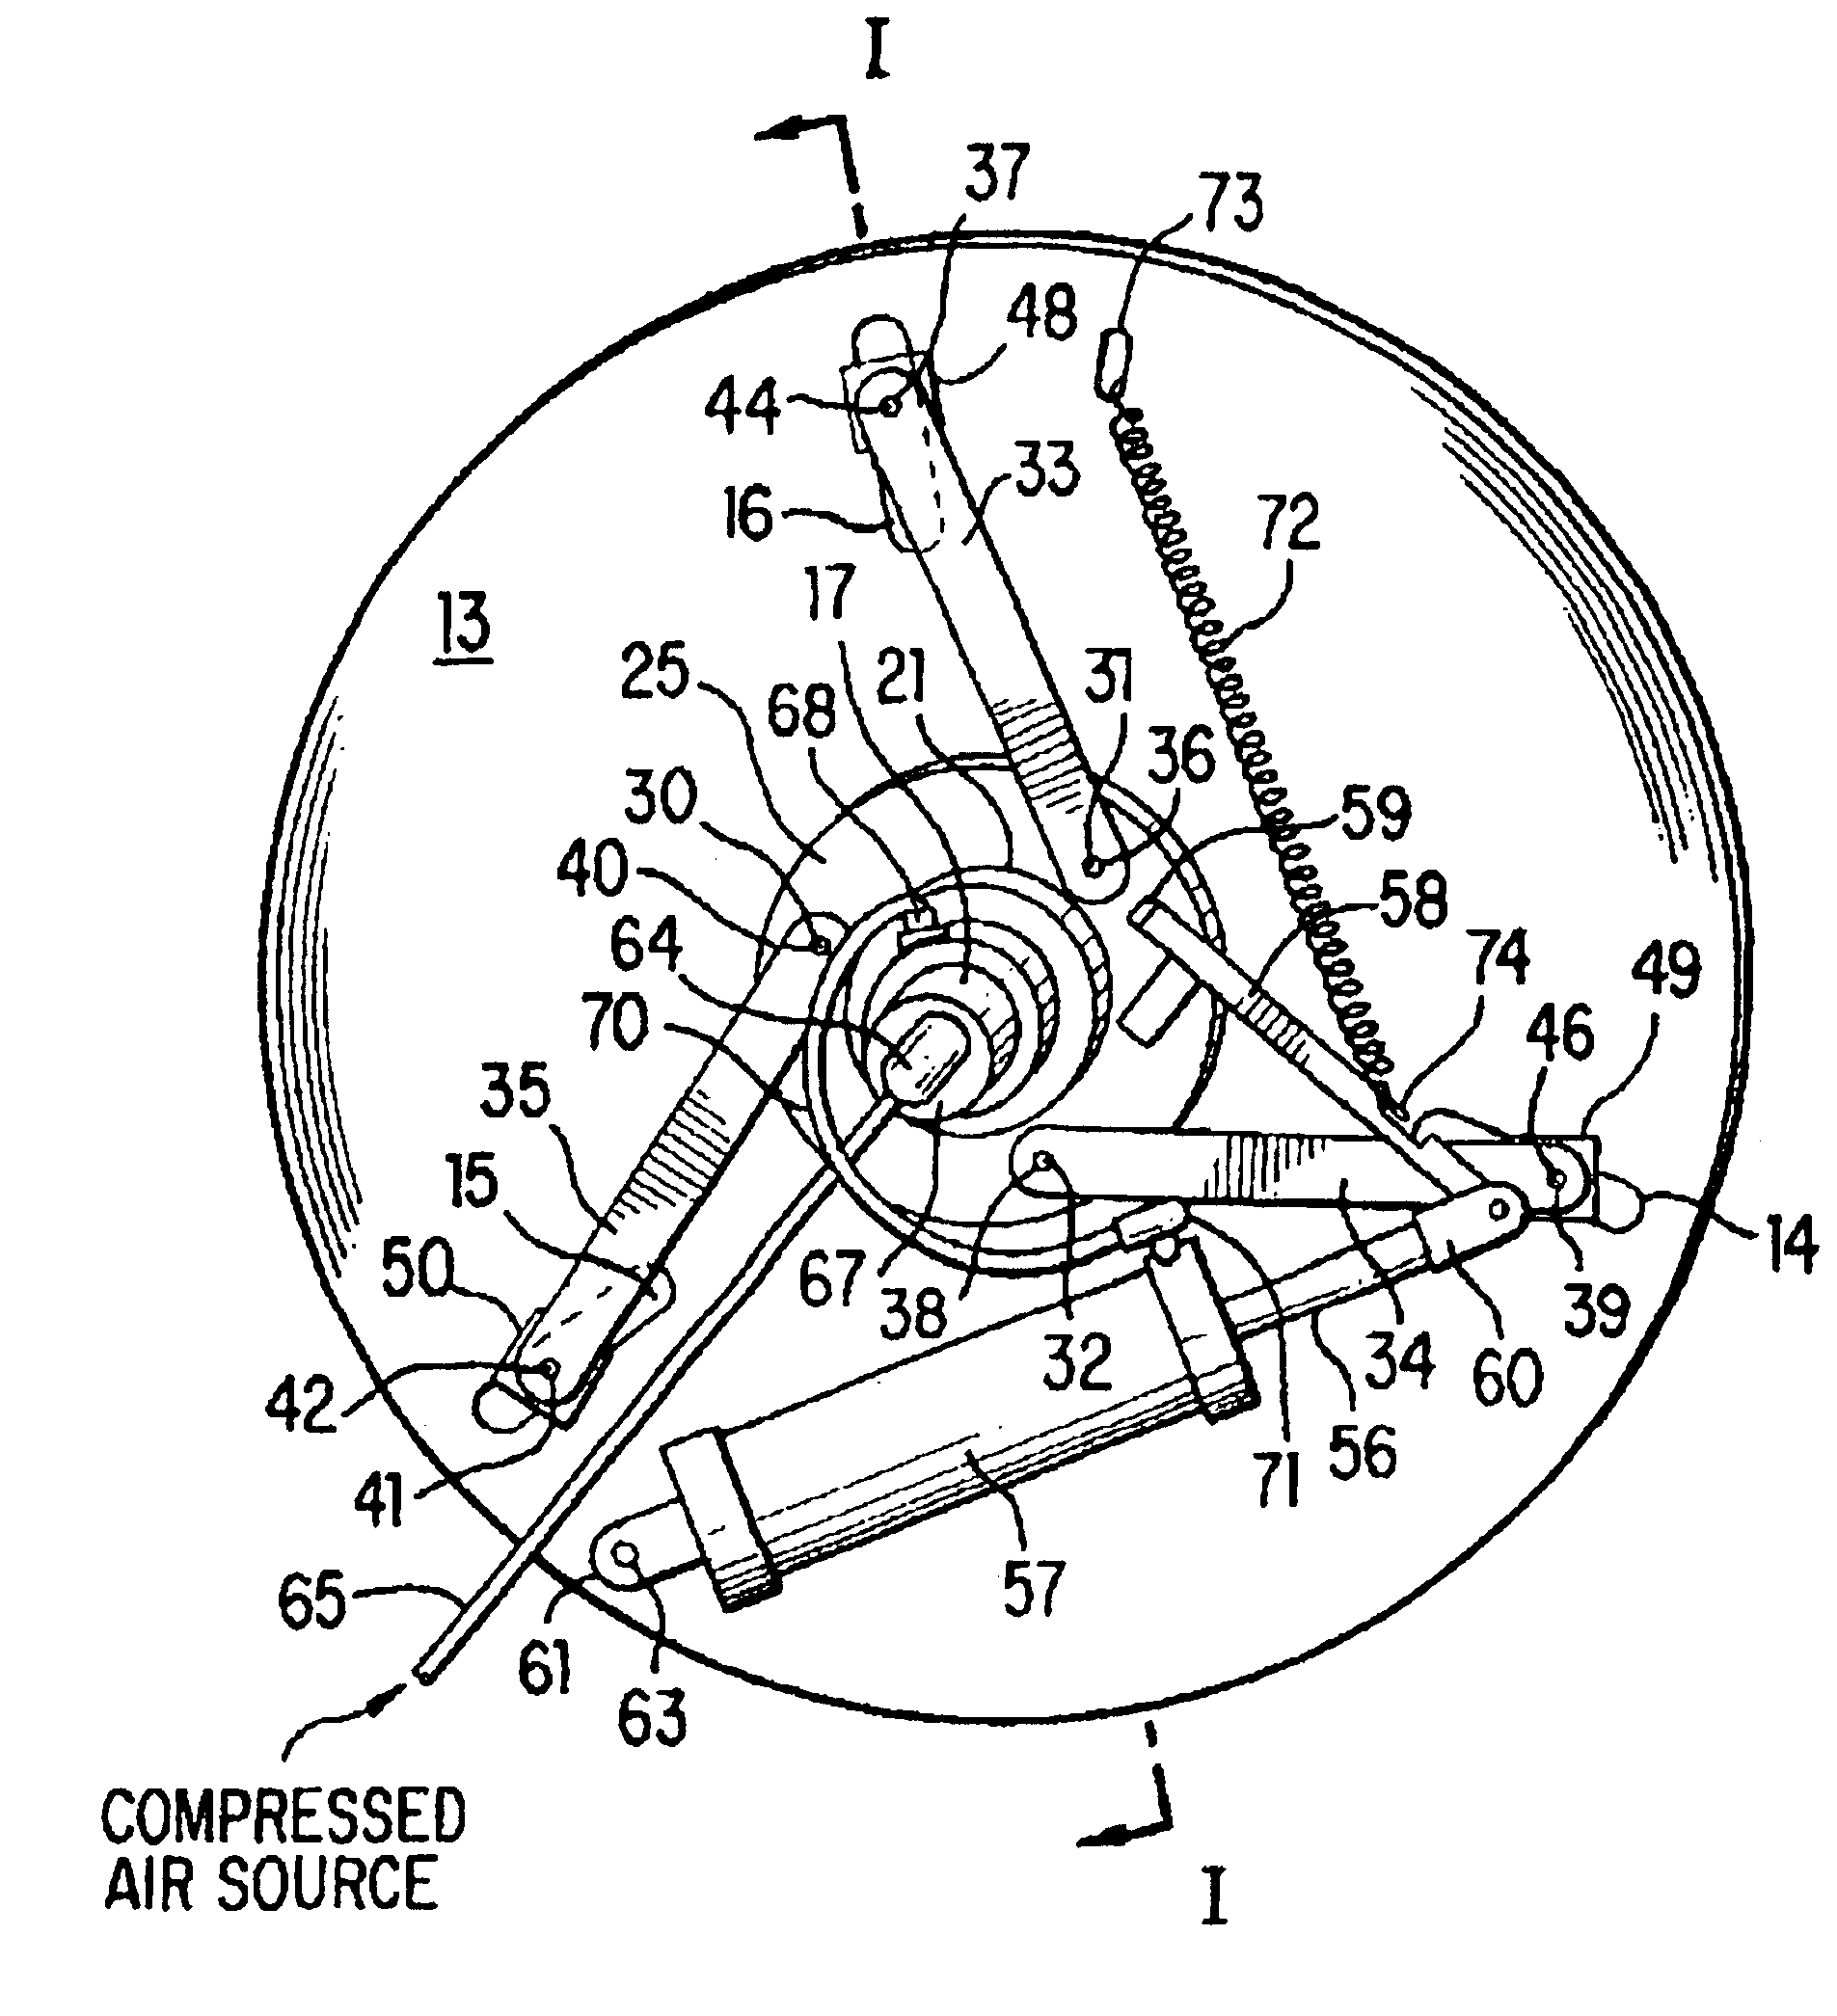 Powered turntable with universal, self-adjusting chuck for holding auto wheels and the like for polishing